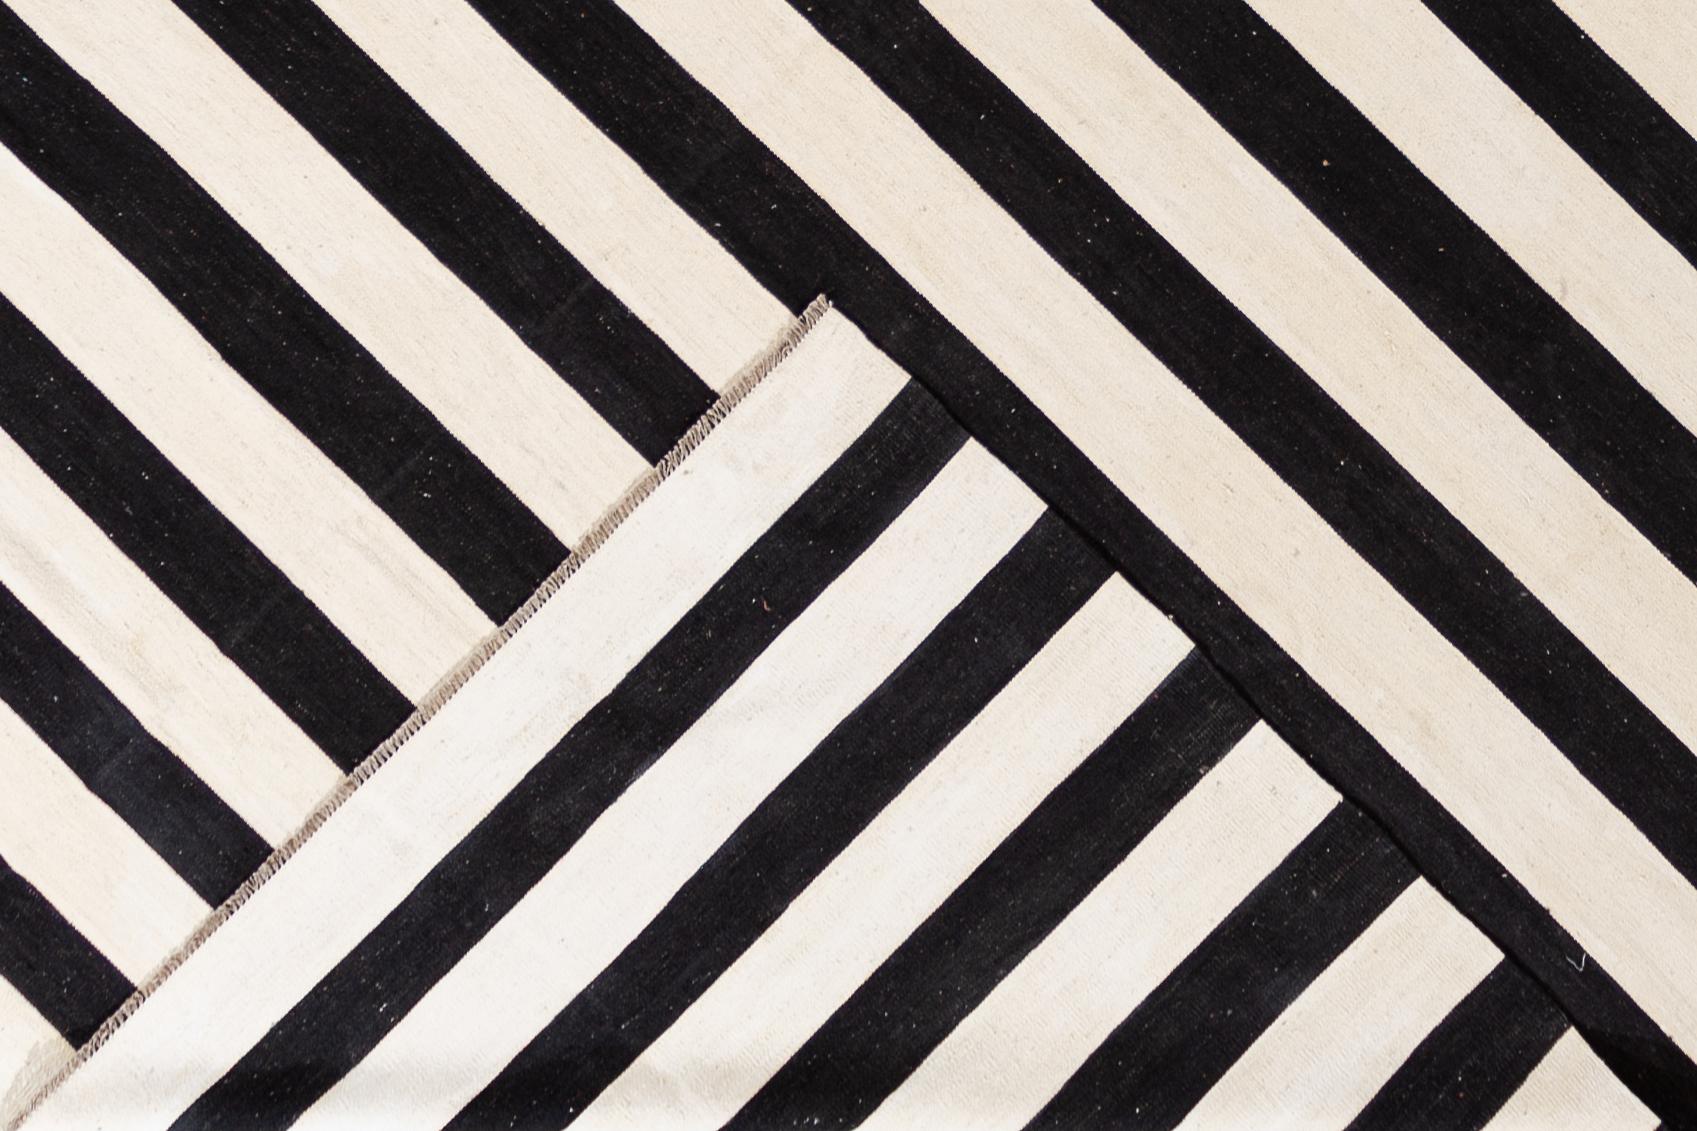 Beautiful 21st century contemporary Kilim rug, handwoven wool in an all-over black and white striped design.

This rug measures 12' 2